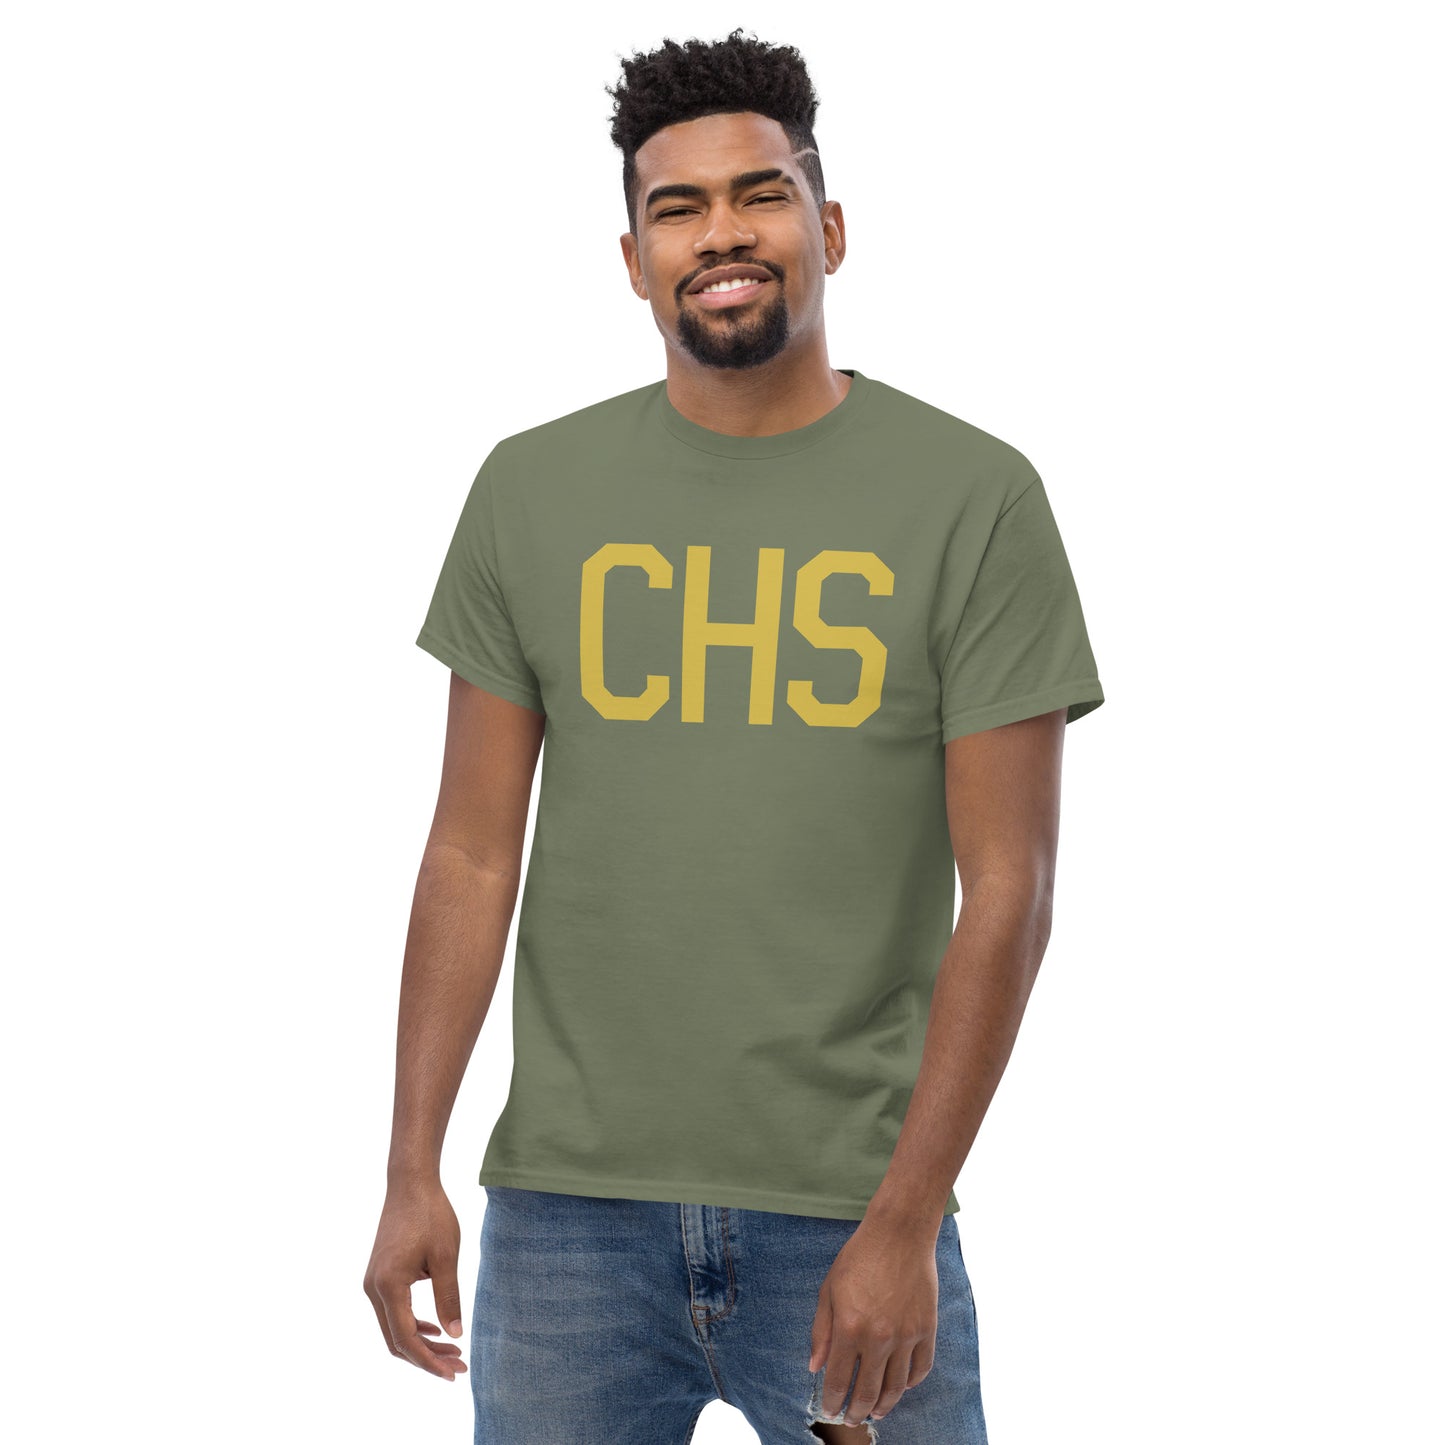 Aviation Enthusiast Men's Tee - Old Gold Graphic • CHS Charleston • YHM Designs - Image 06